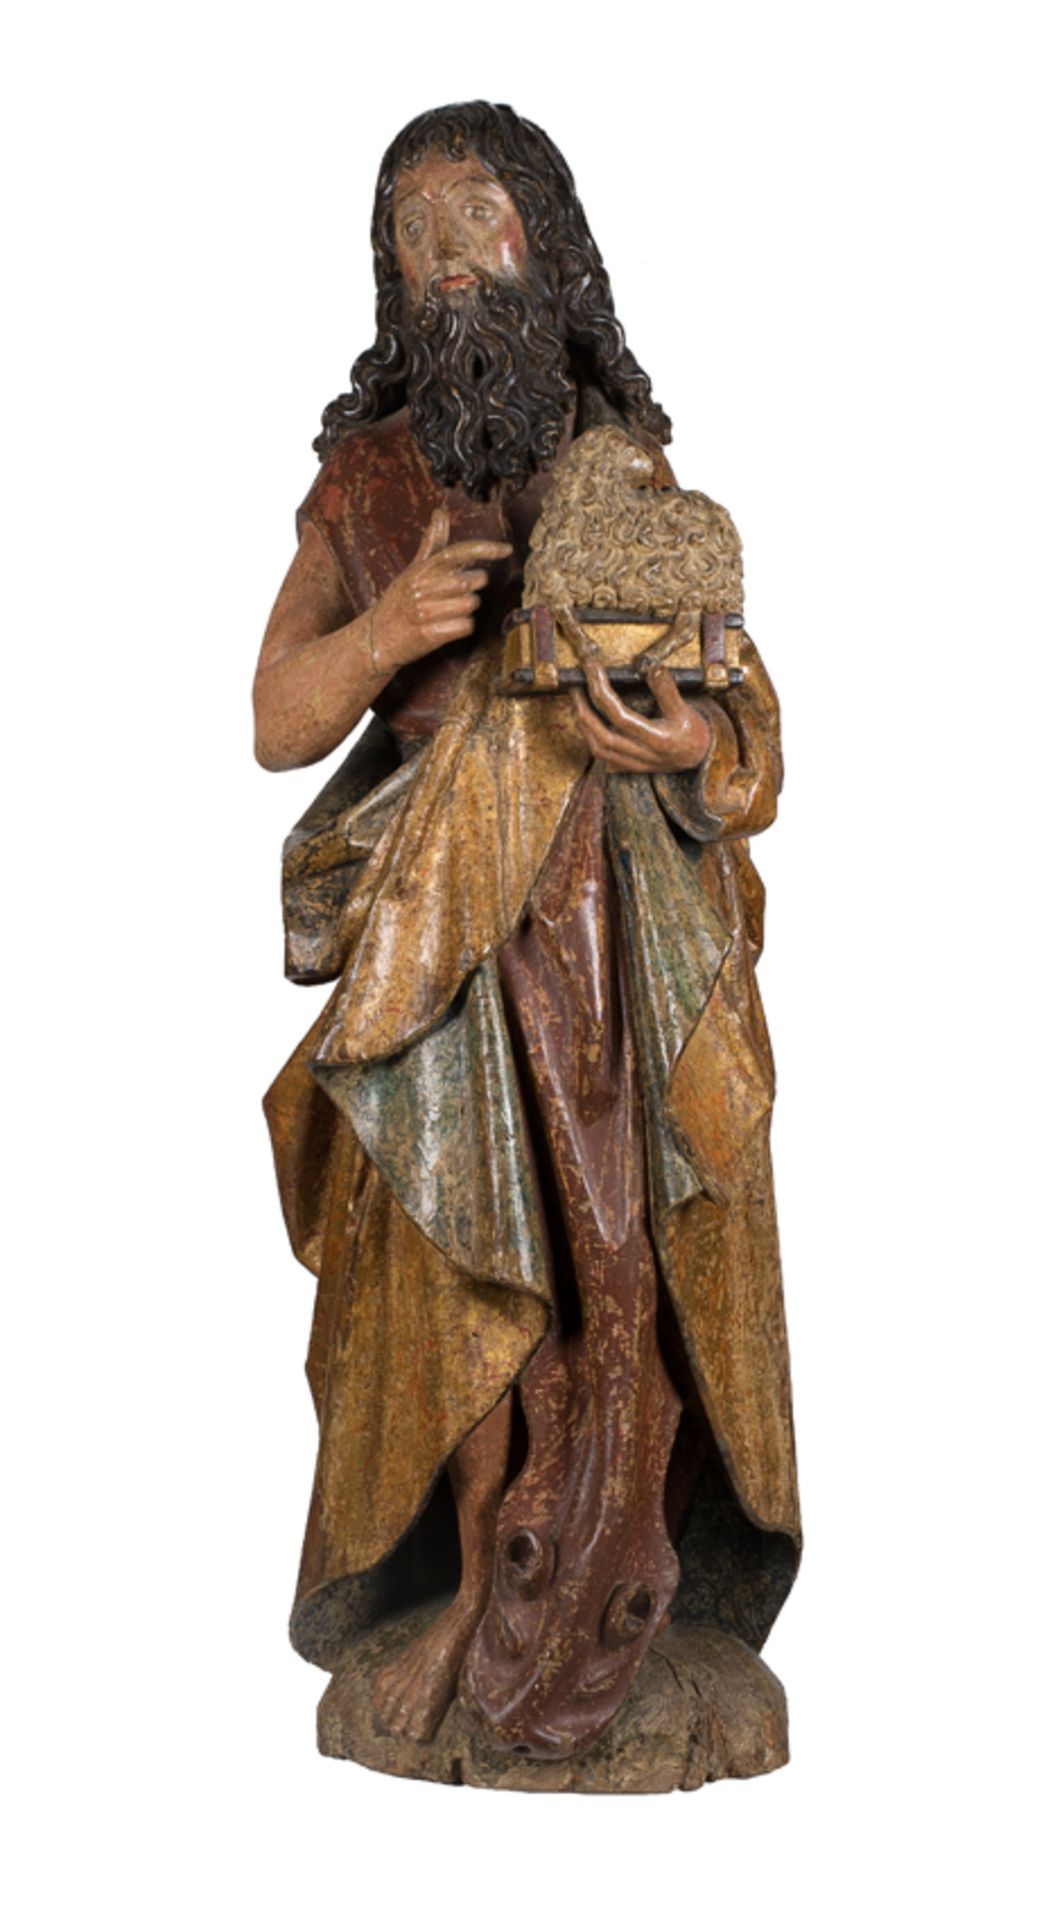 "Saint John the Baptist". Carved, polychromed and gilded wooden sculpture. Anonymous. Northern Europ